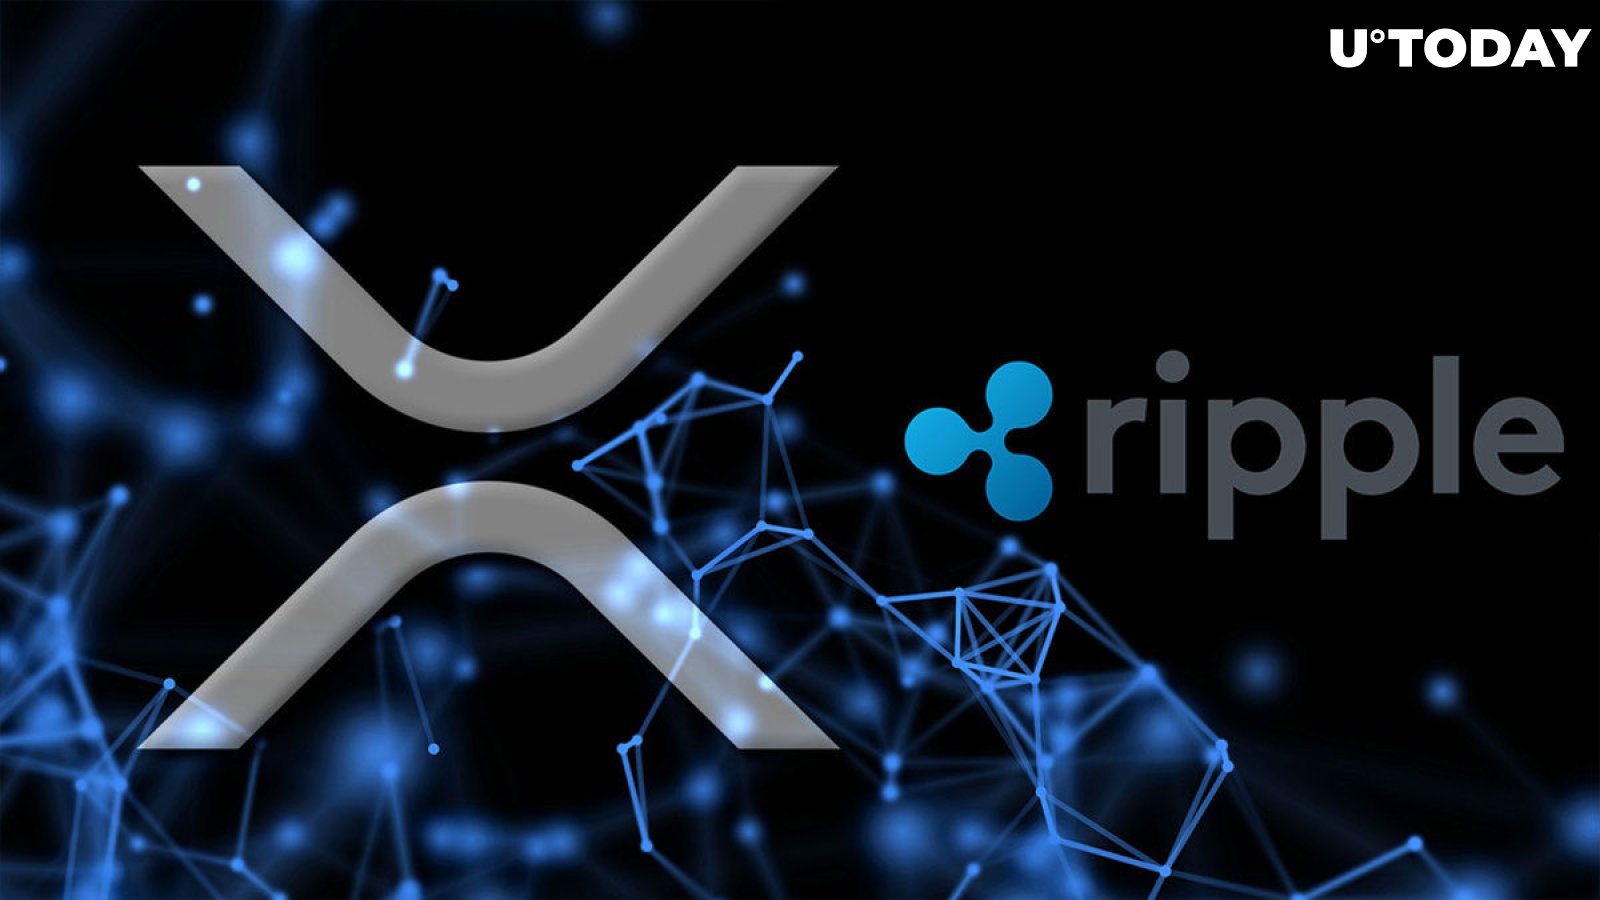 XRP Funds Seeing Millions of Dollars Worth of Inflows. Here’s Why